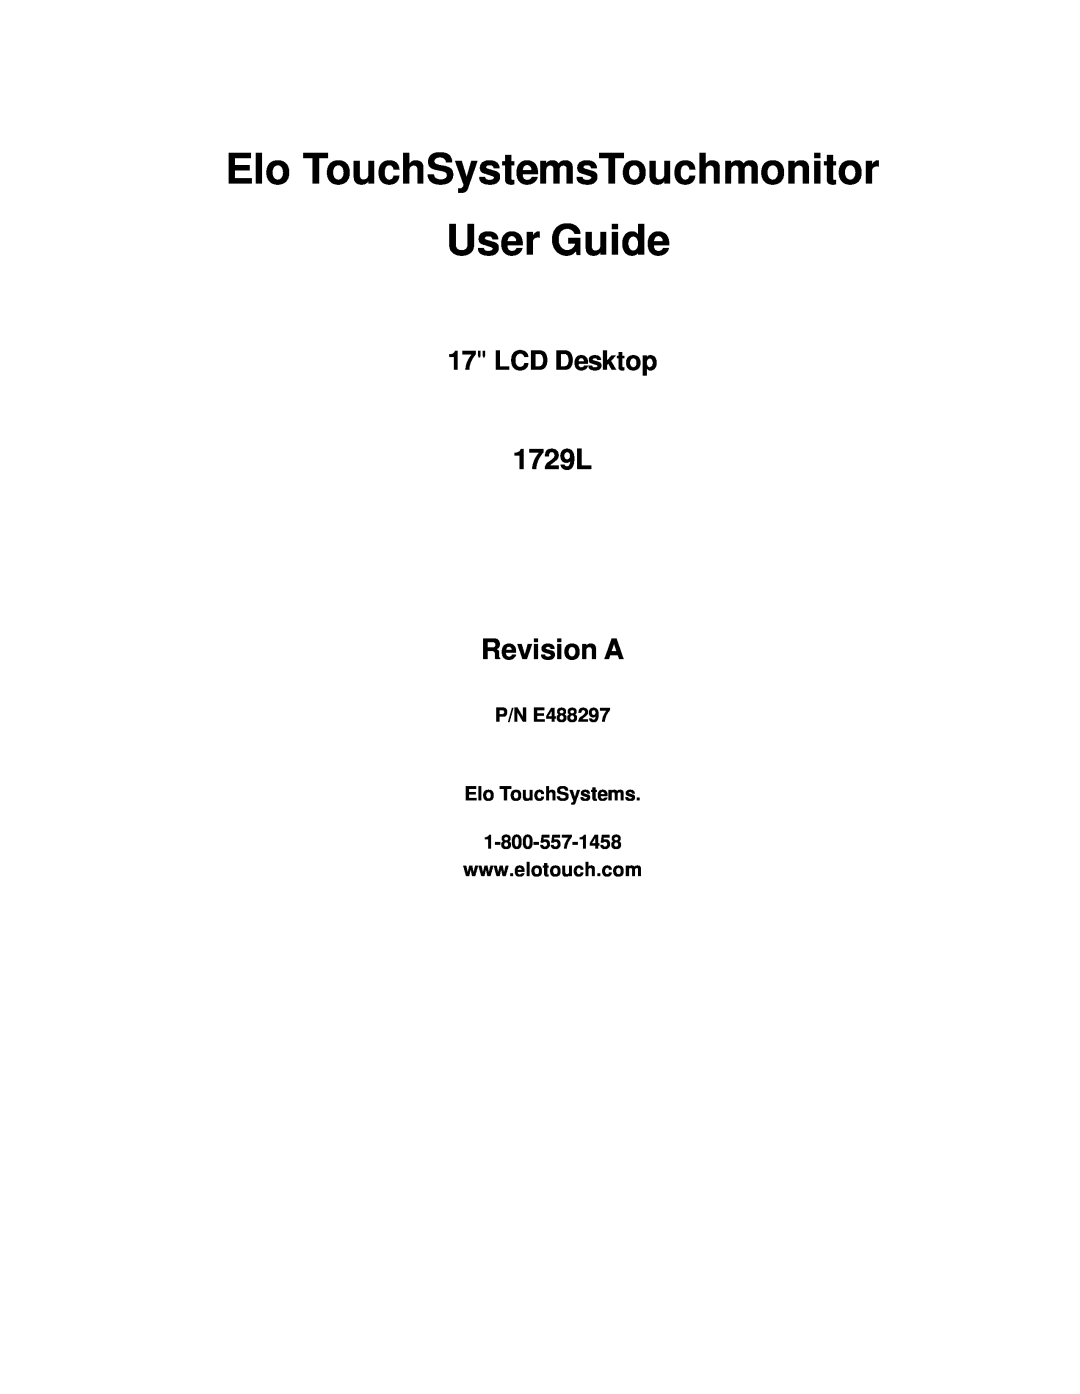 Elo TouchSystems manual Elo TouchSystemsTouchmonitor, User Guide, 1729L Revision A, LCD Desktop 